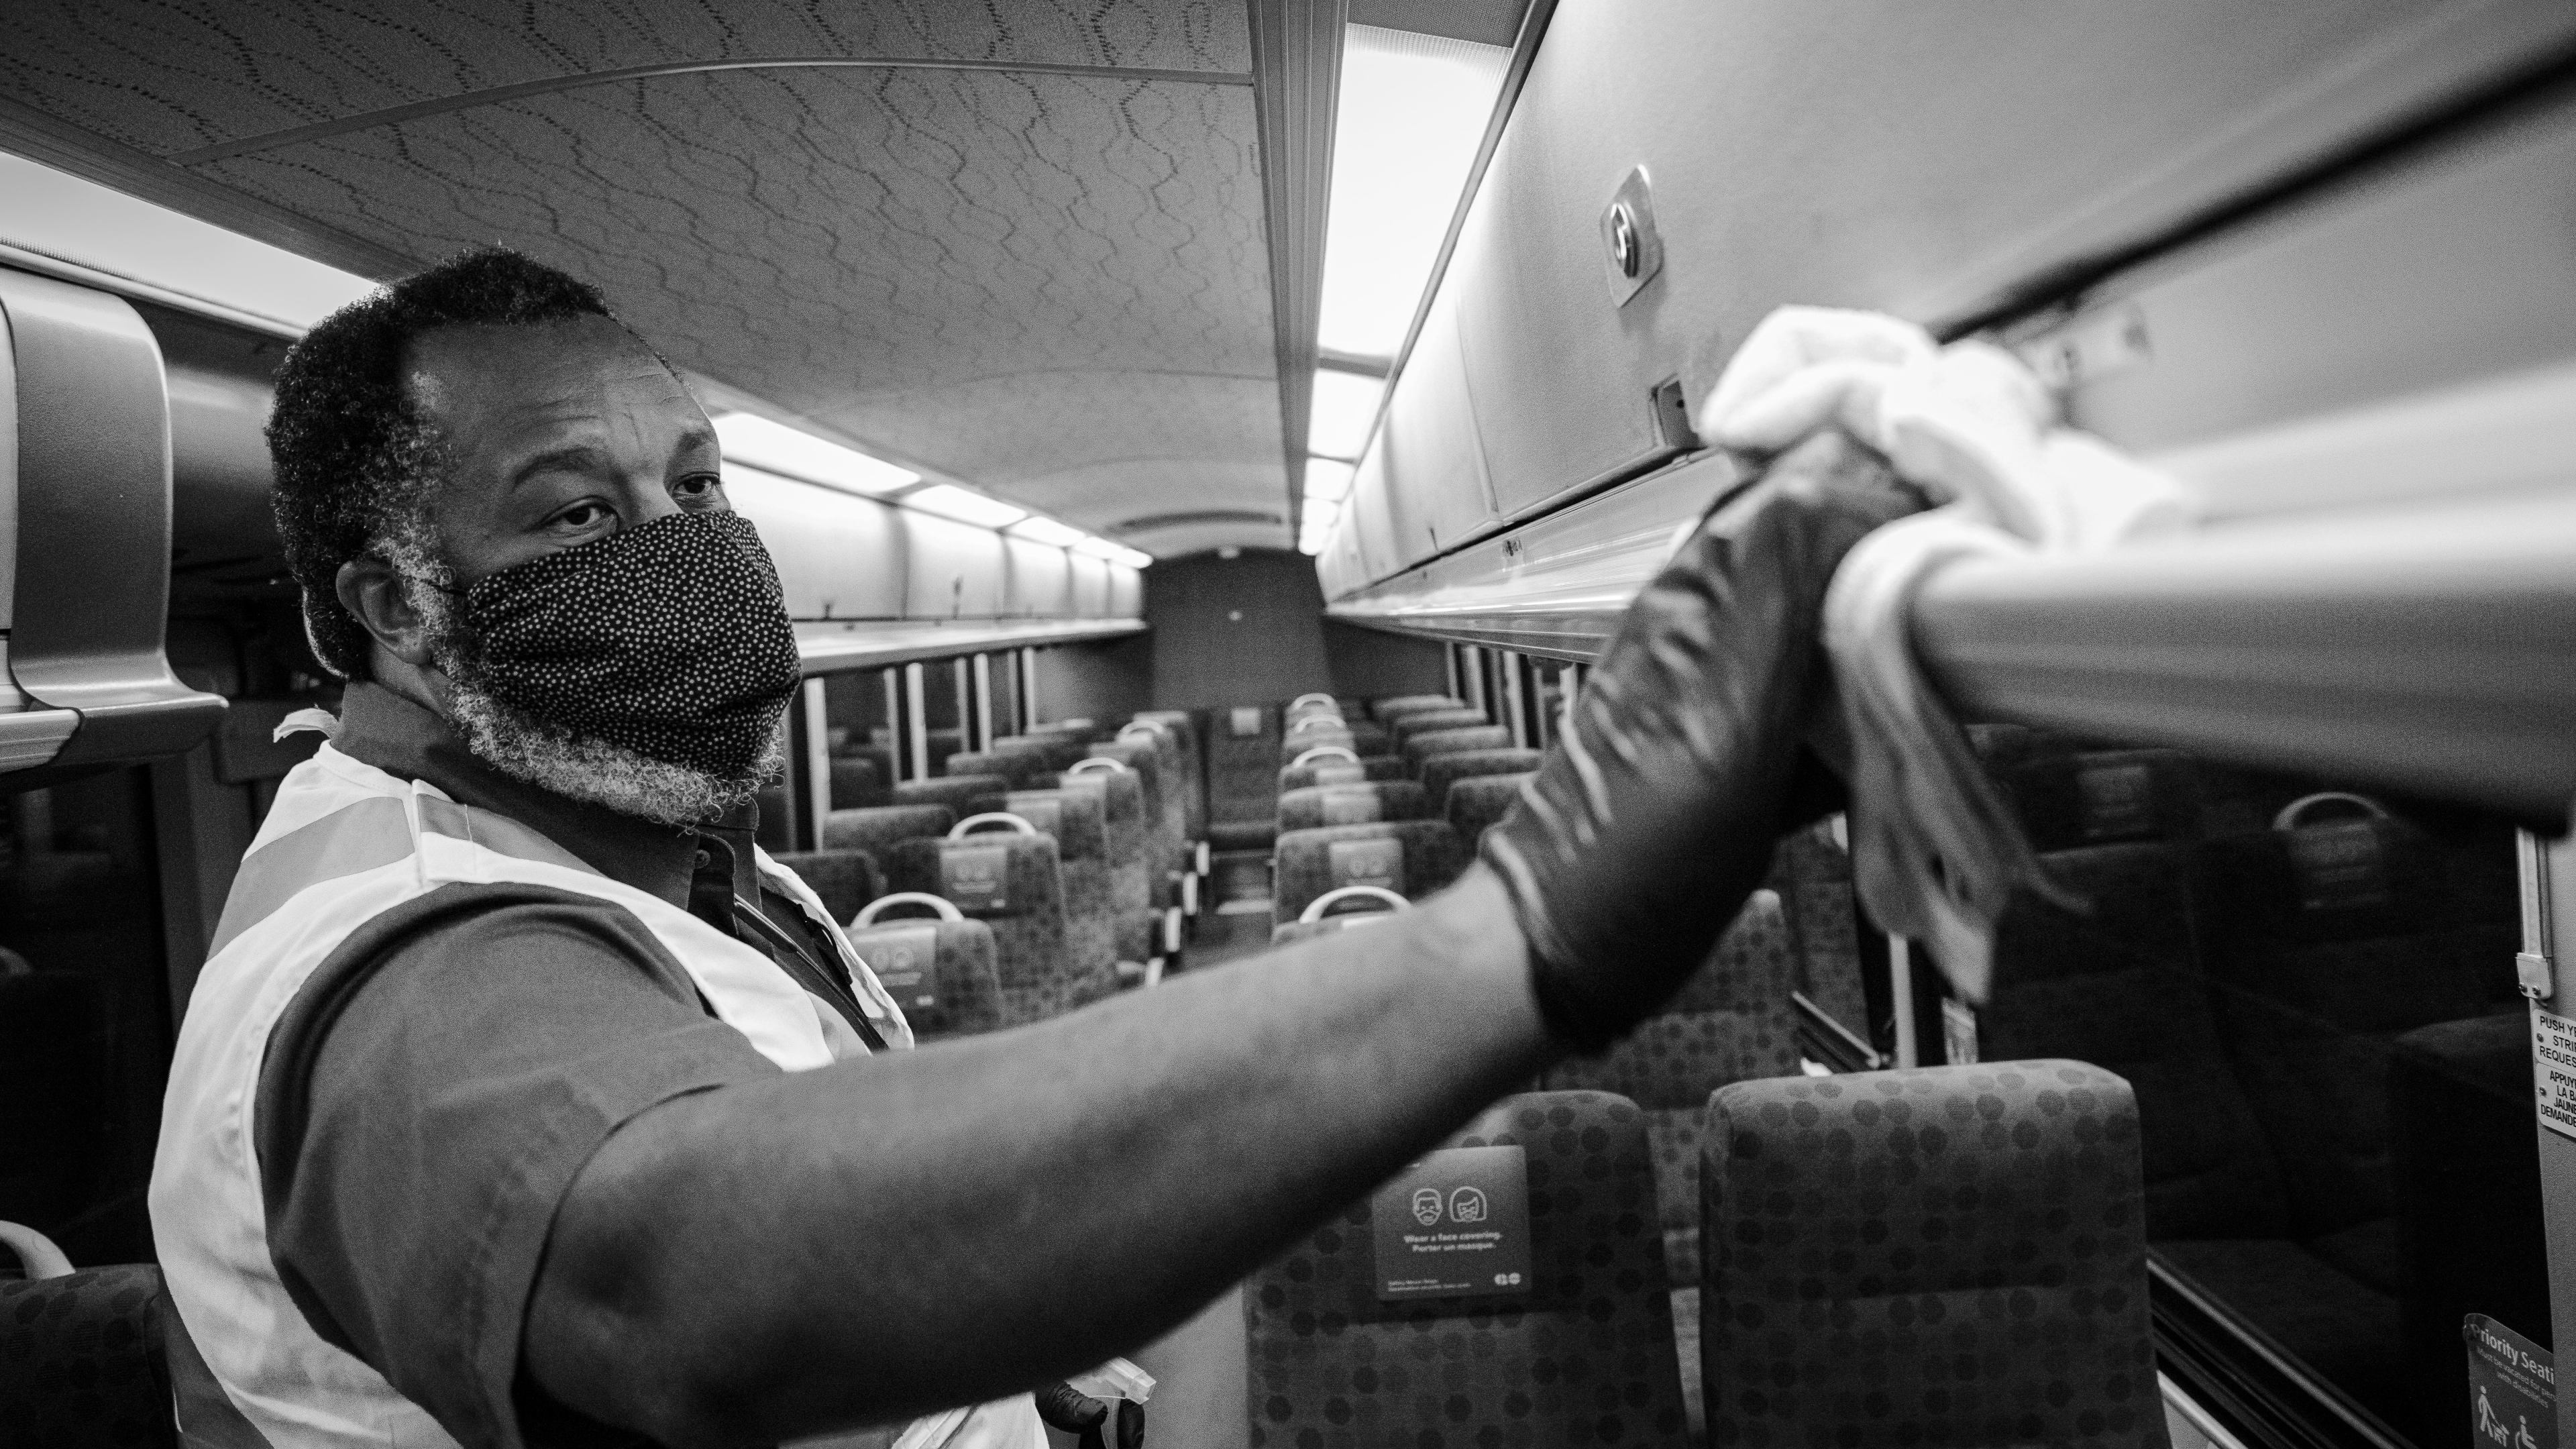 A worker scrubs the inside of a bus.